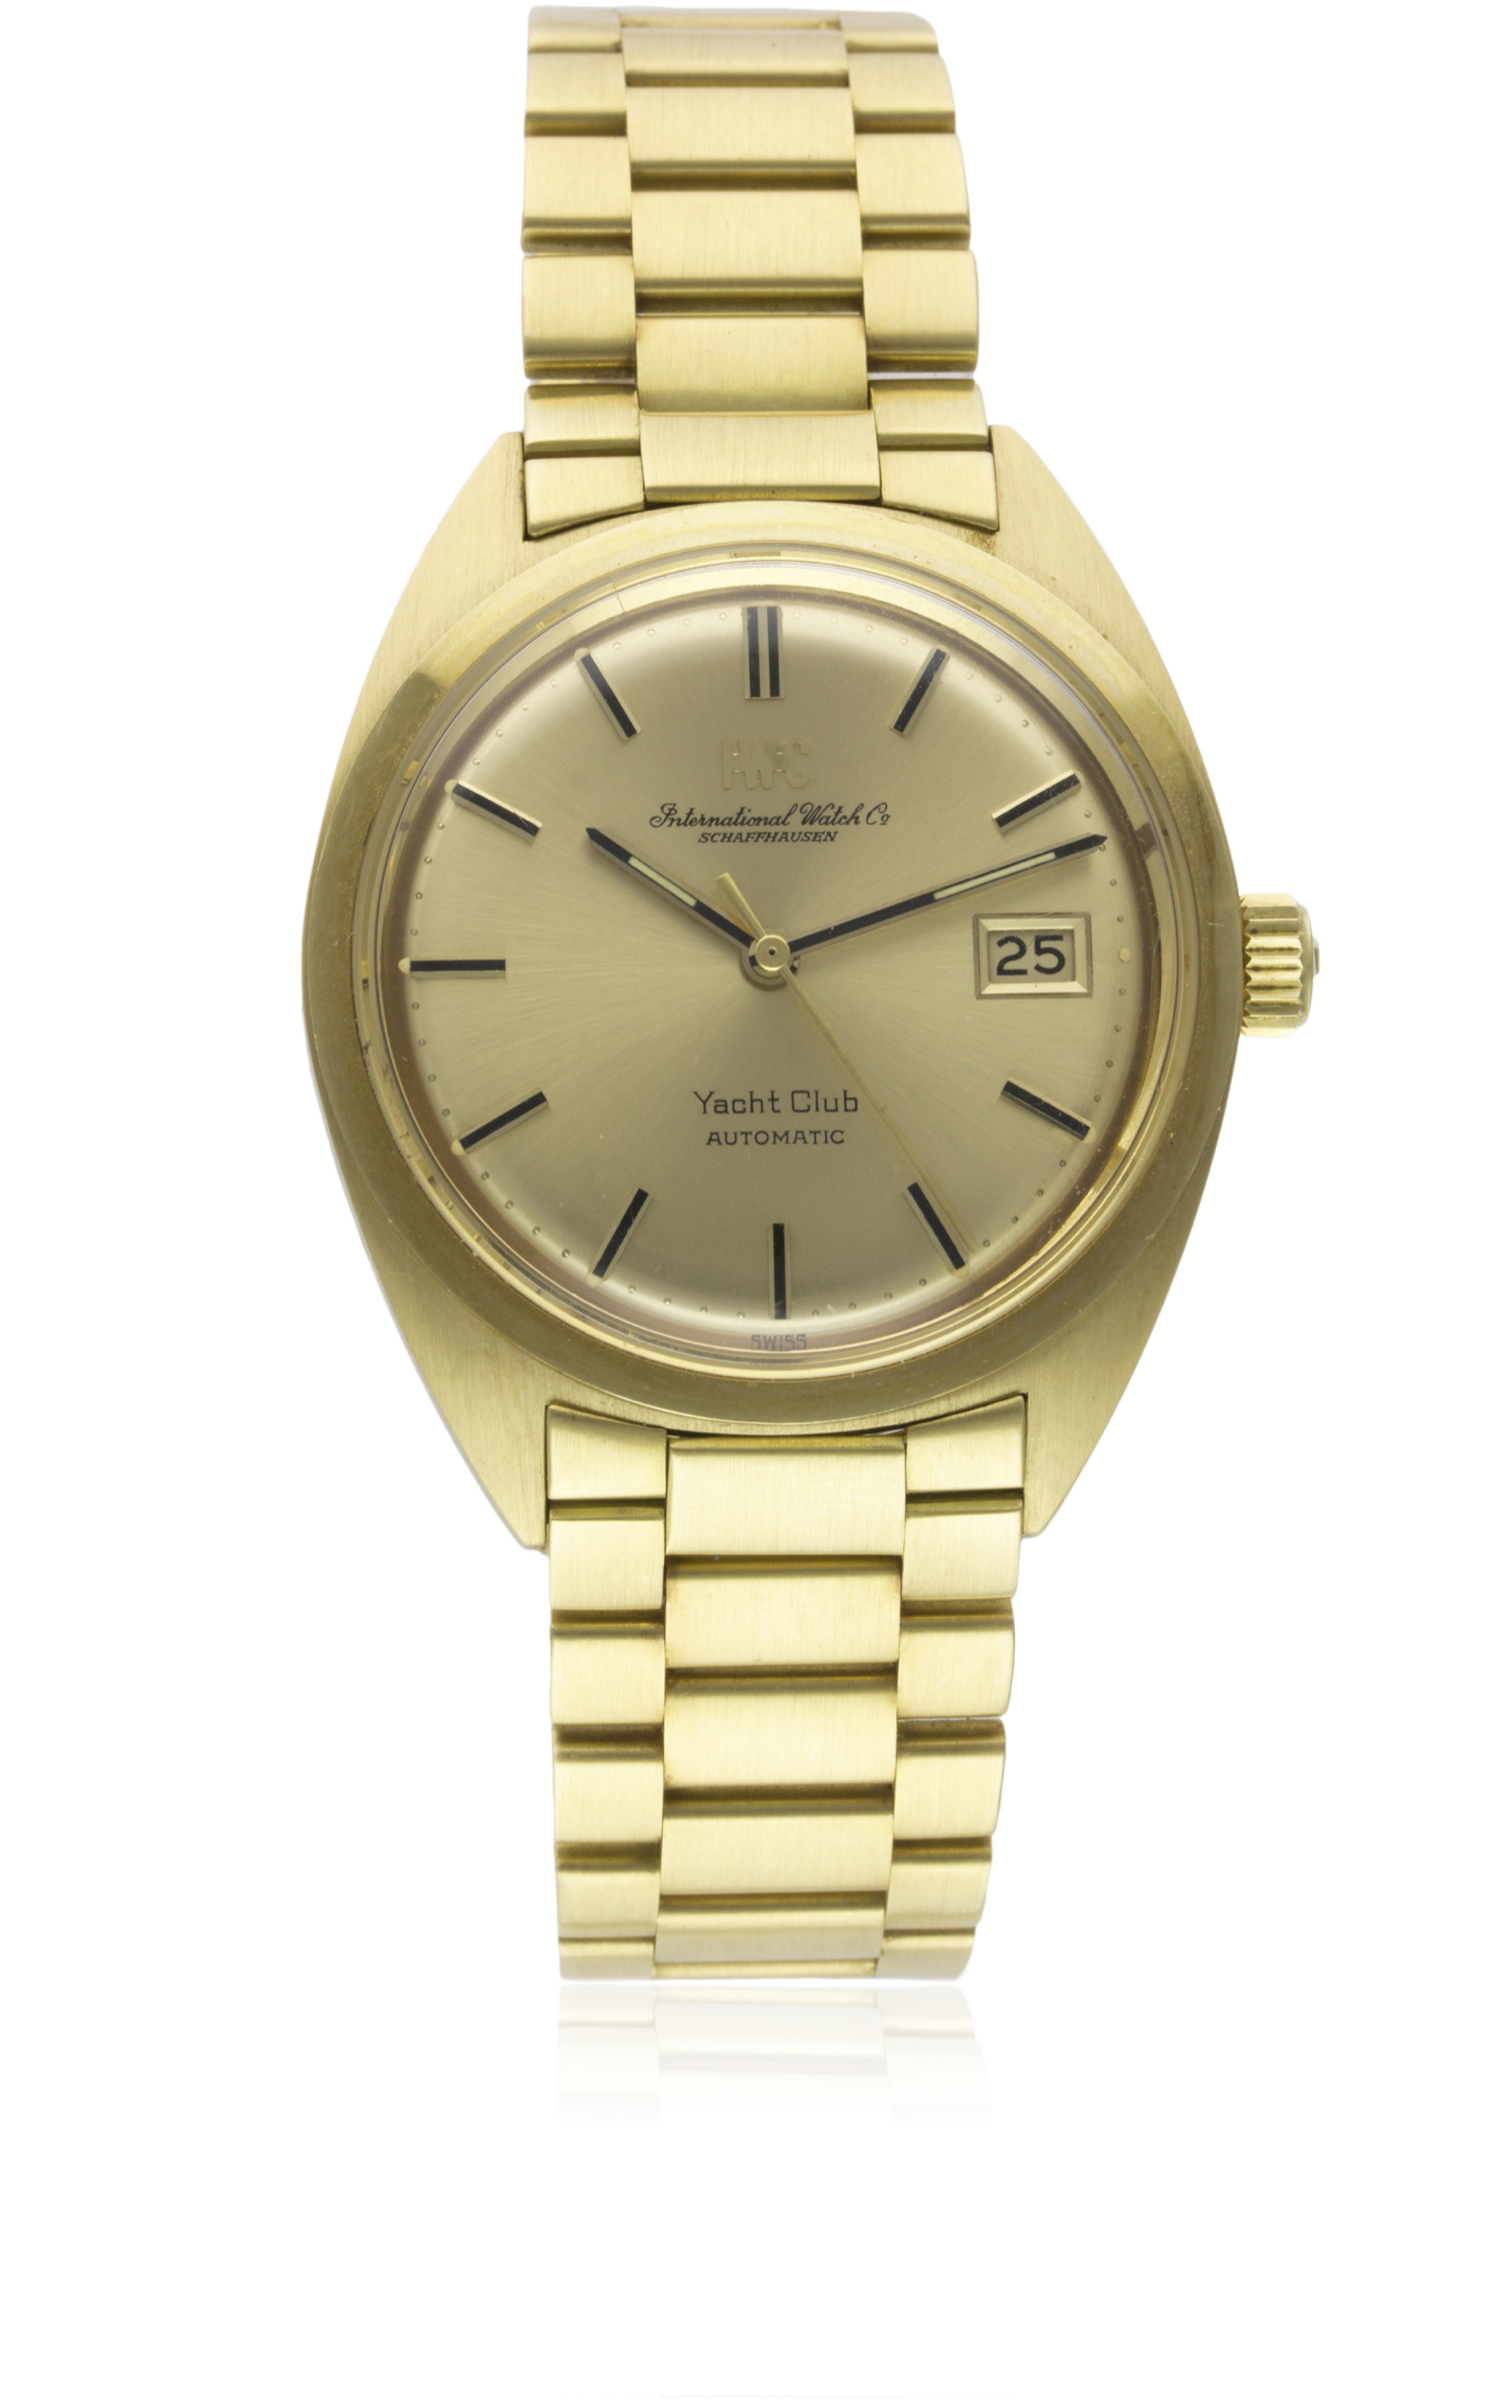 A FINE GENTLEMAN'S 18K SOLID GOLD IWC YACHT CLUB AUTOMATIC BRACELET WATCH CIRCA 1970 Movement: - Image 2 of 2